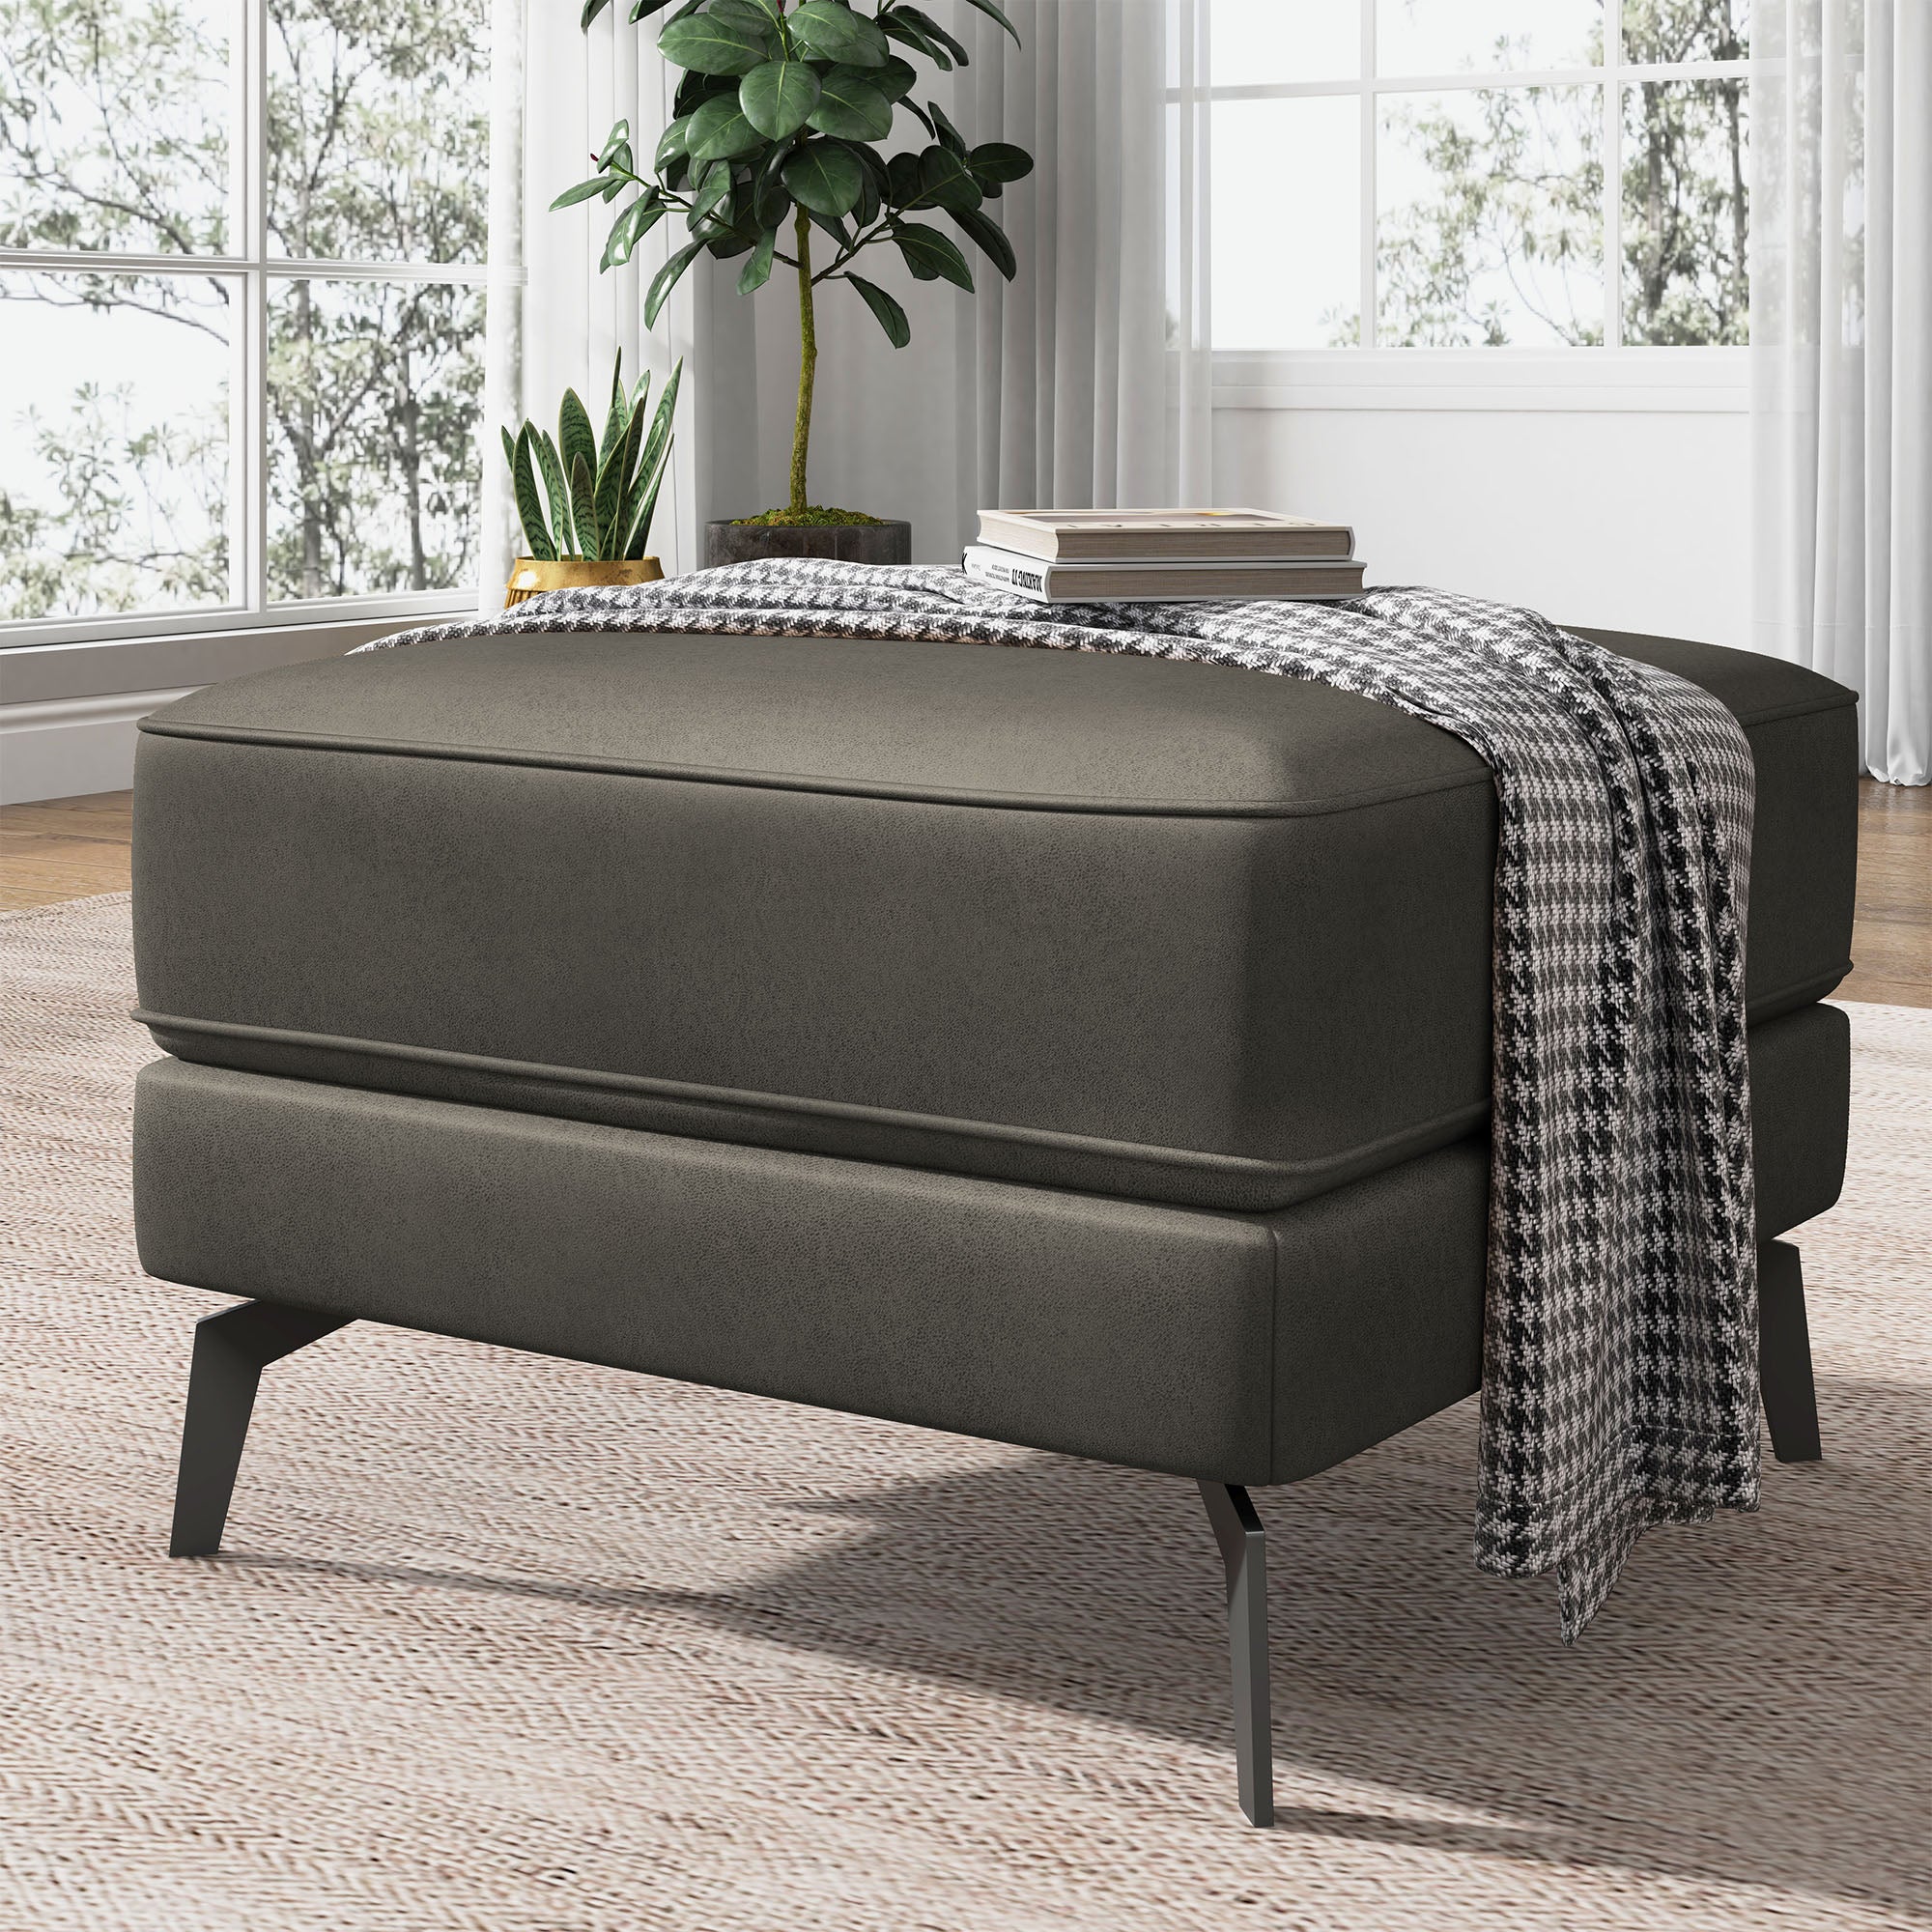 NOLANY Dark Grey Air Leathaer Square Footstool for Living Room